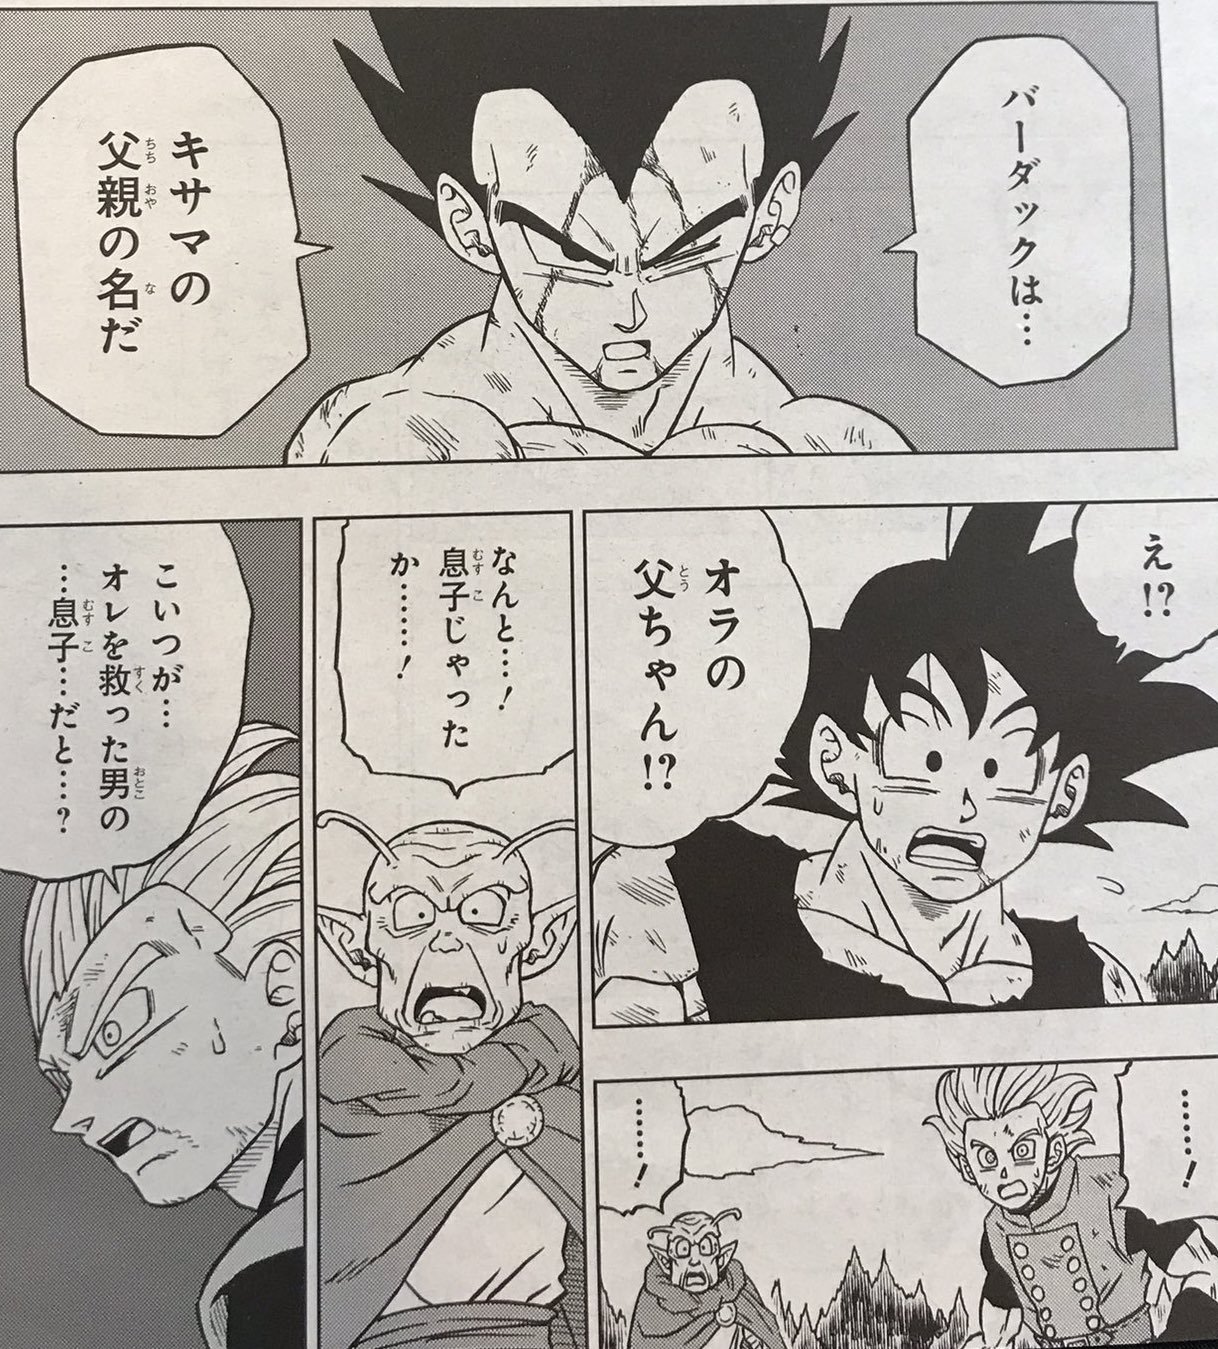 Dragon Ball Grievous — Here are some of the manga panels from Dragon Ball